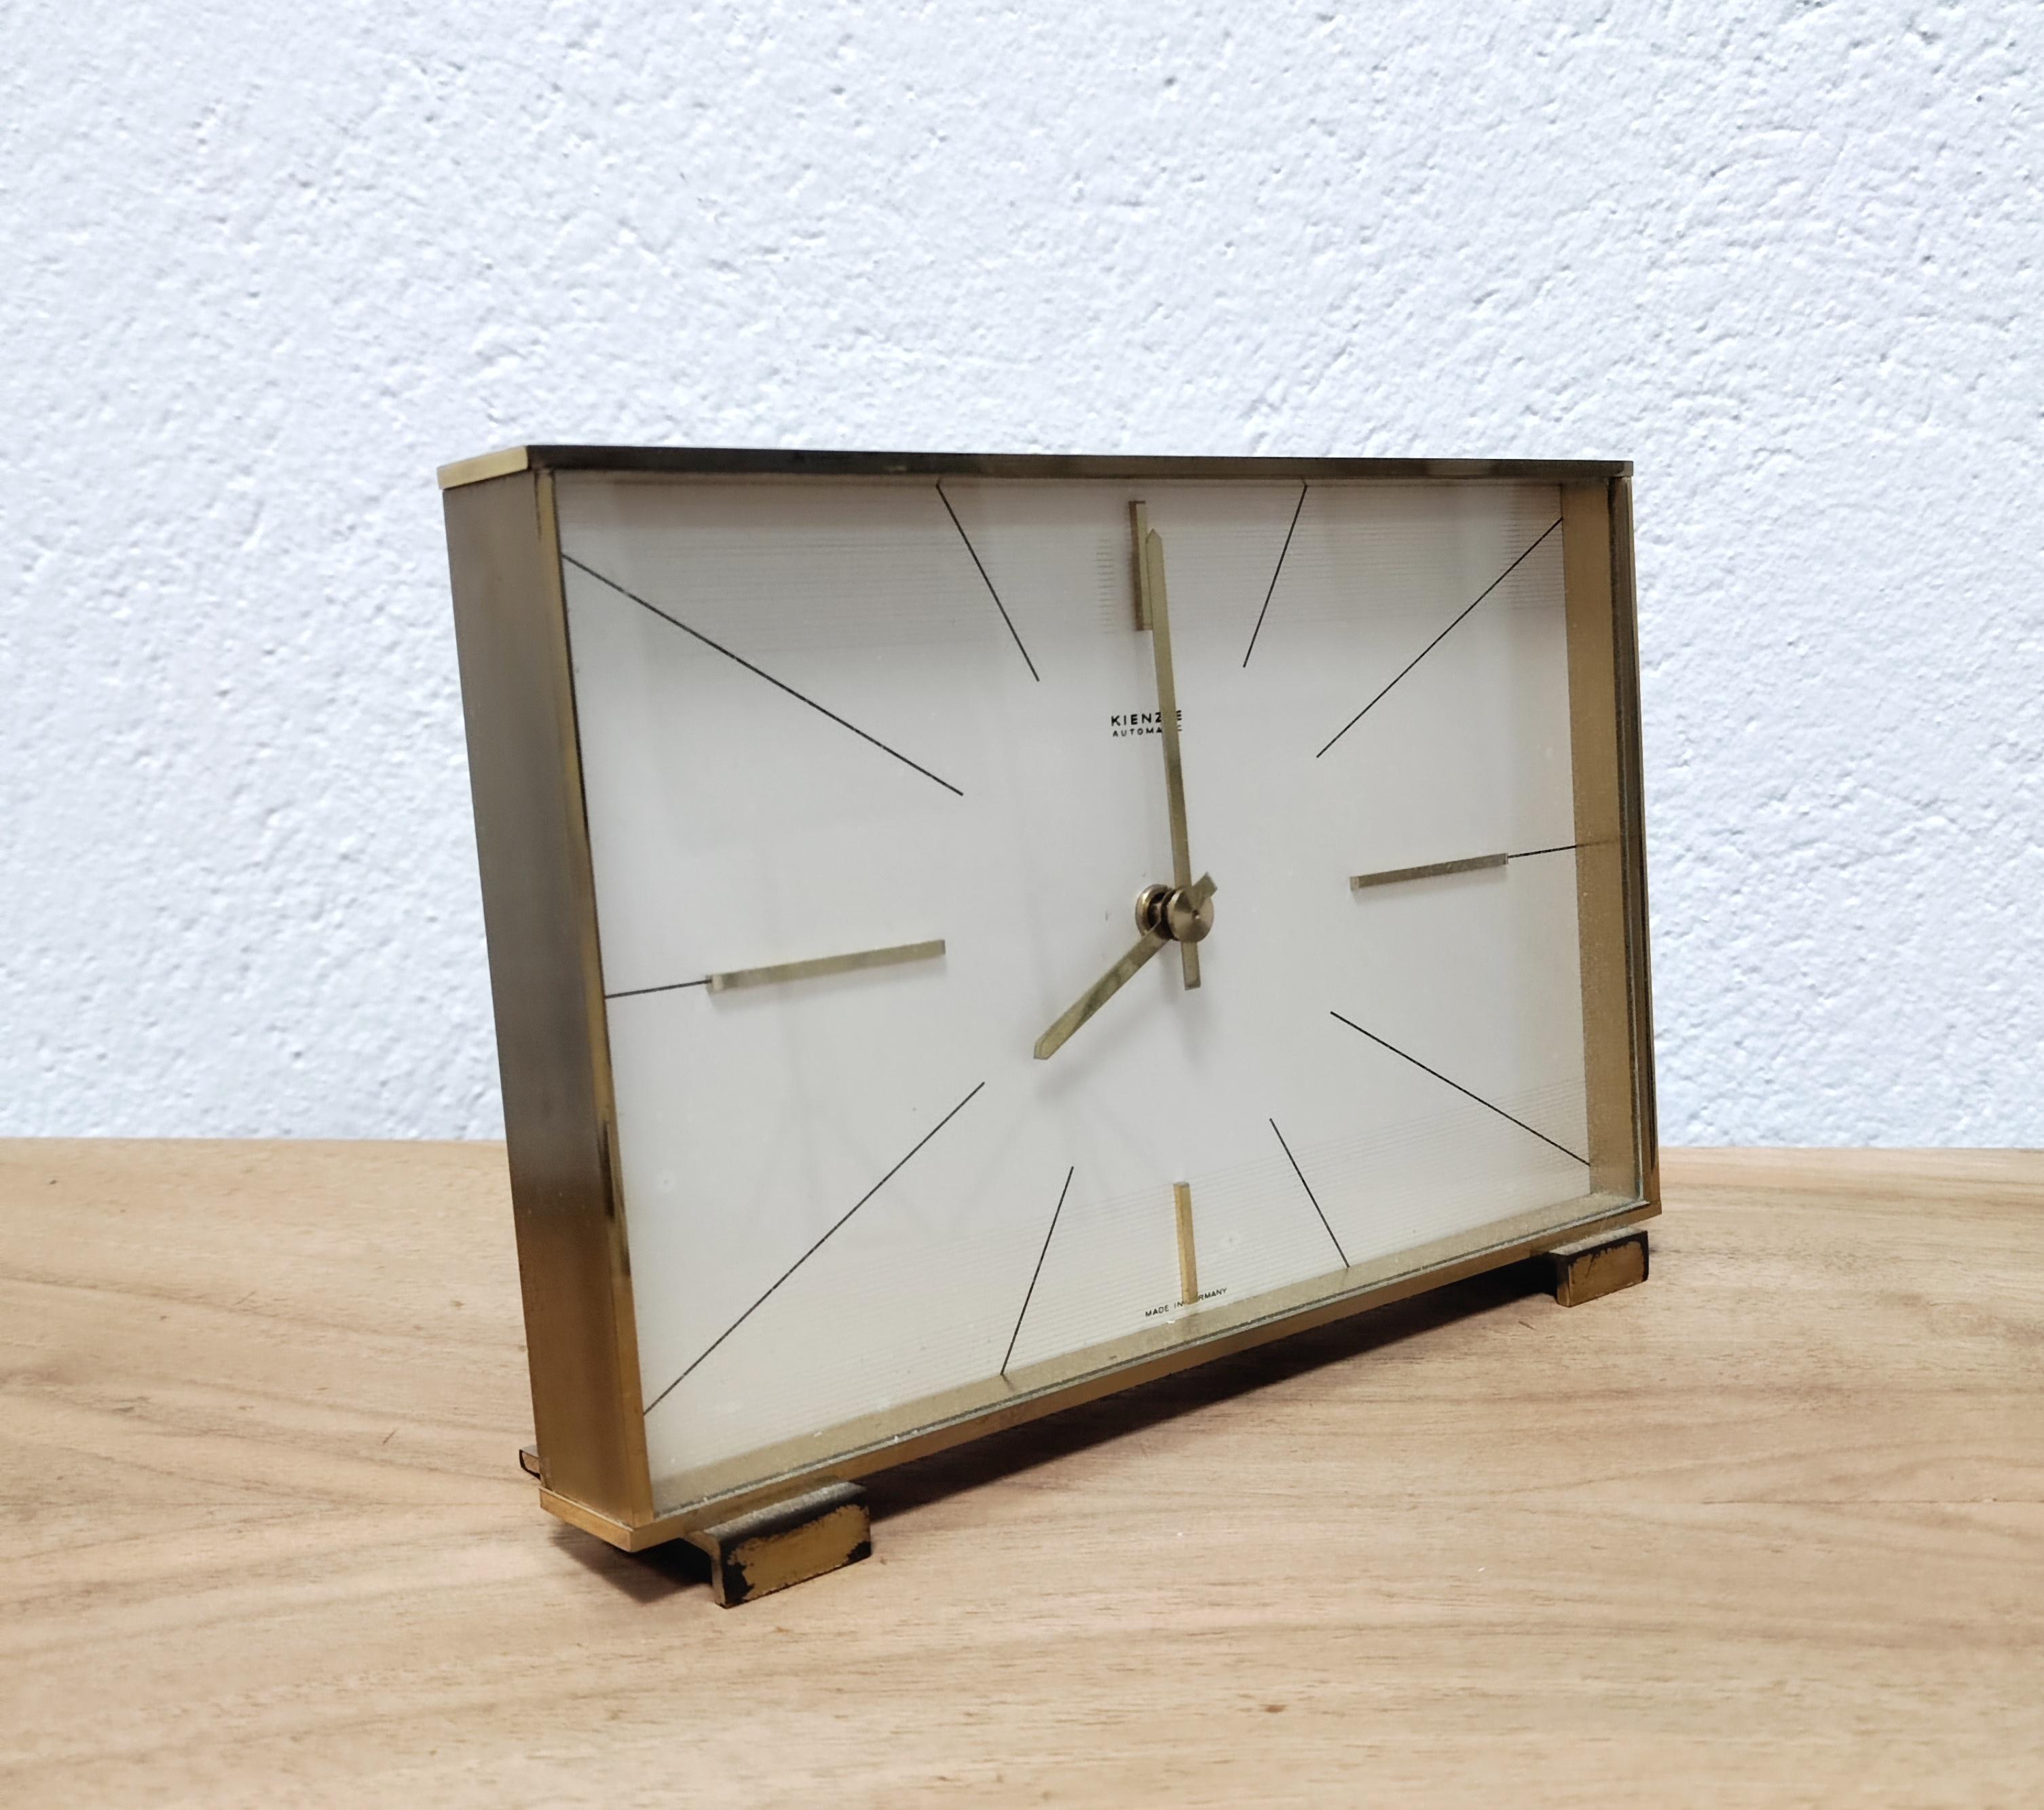 In this listing you will find an elegant Hollywood Regency Table Clock by Kienzle. It is made in solid brass, with the glass protective glass. Battery operated. Made in West Germany in 1960s.

If you have any additional questions regarding this